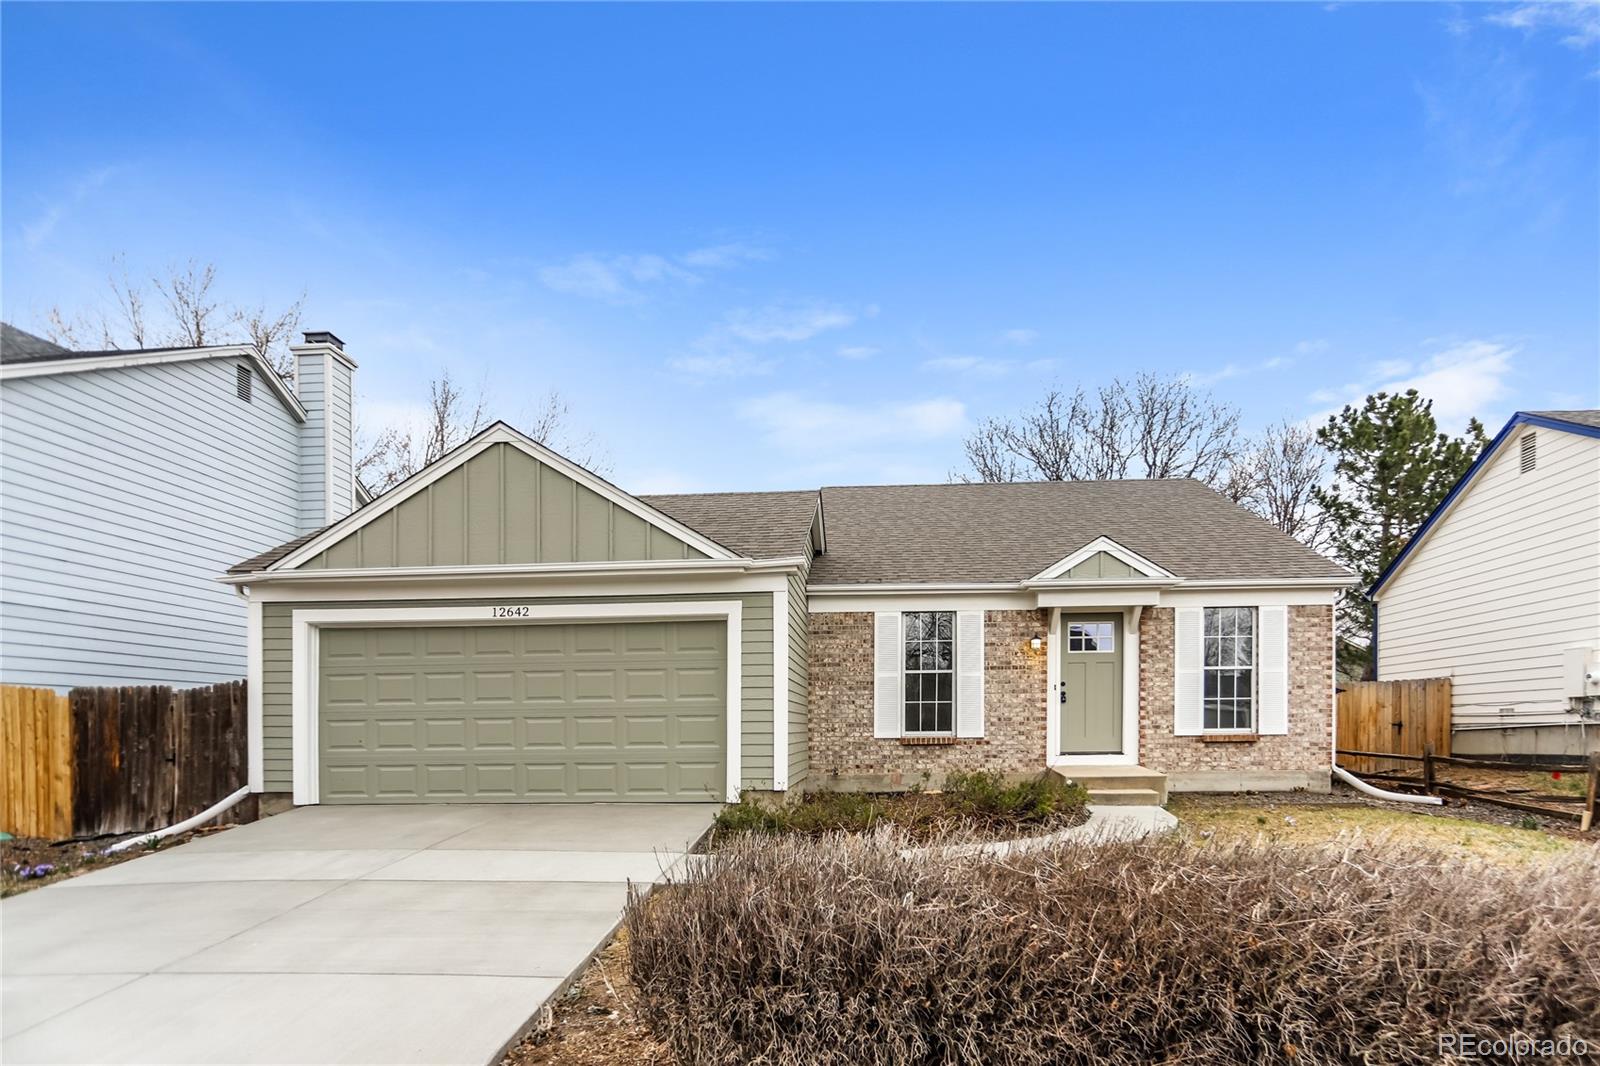 12642  grove street, broomfield sold home. Closed on 2024-05-01 for $495,000.